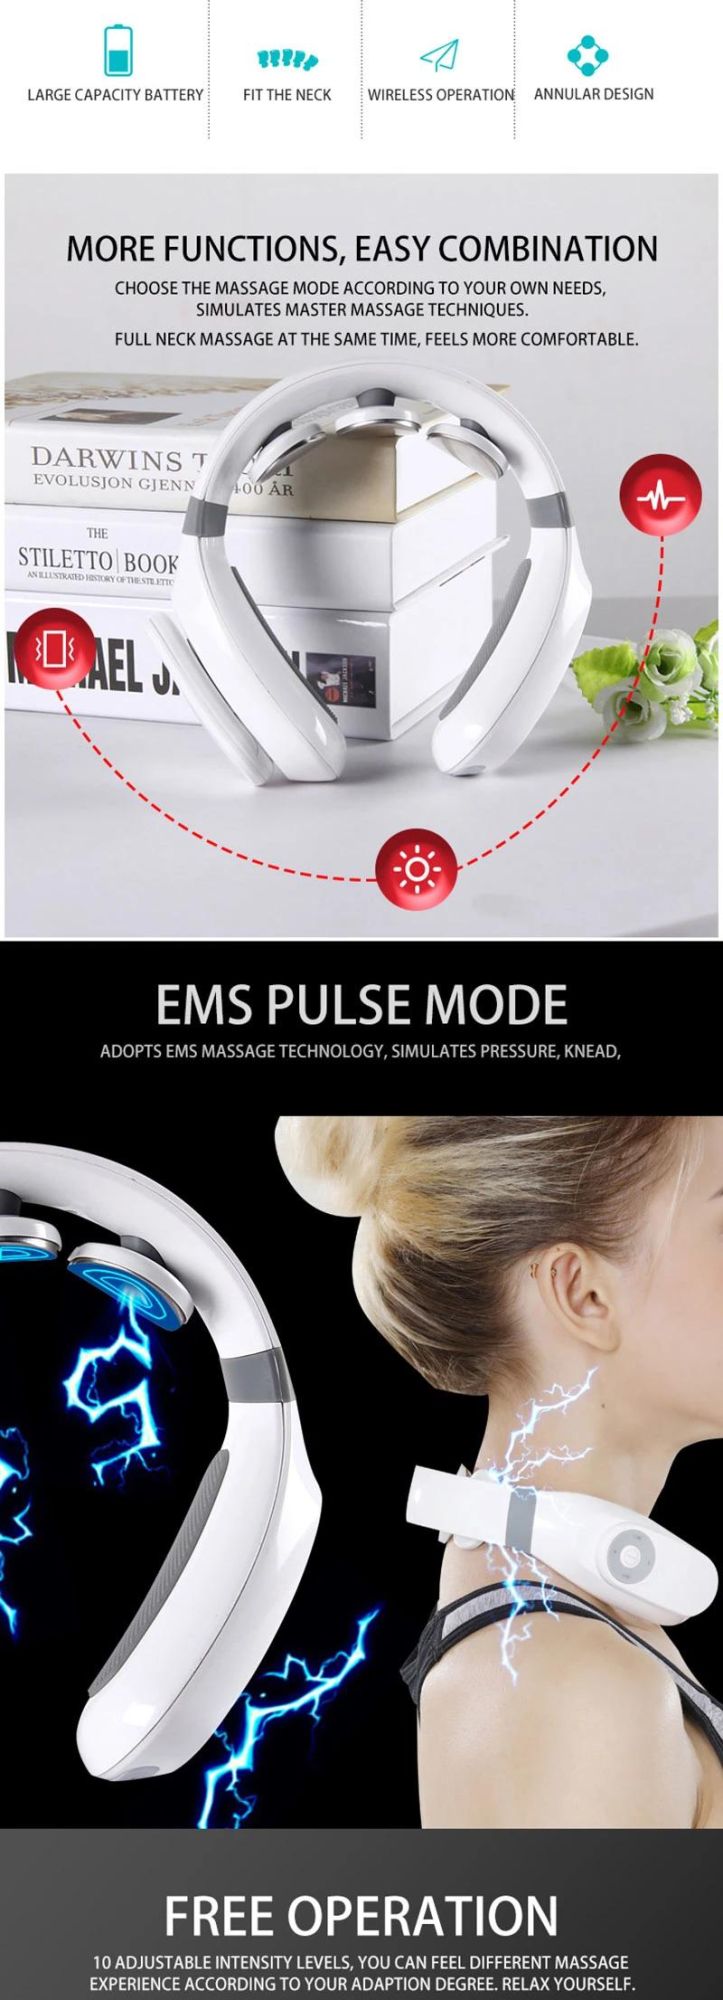 Hezheng Hot Selling Wireless Electric Pulse Cervical Health Care Pain Relief Physical Therapy Neck Massager